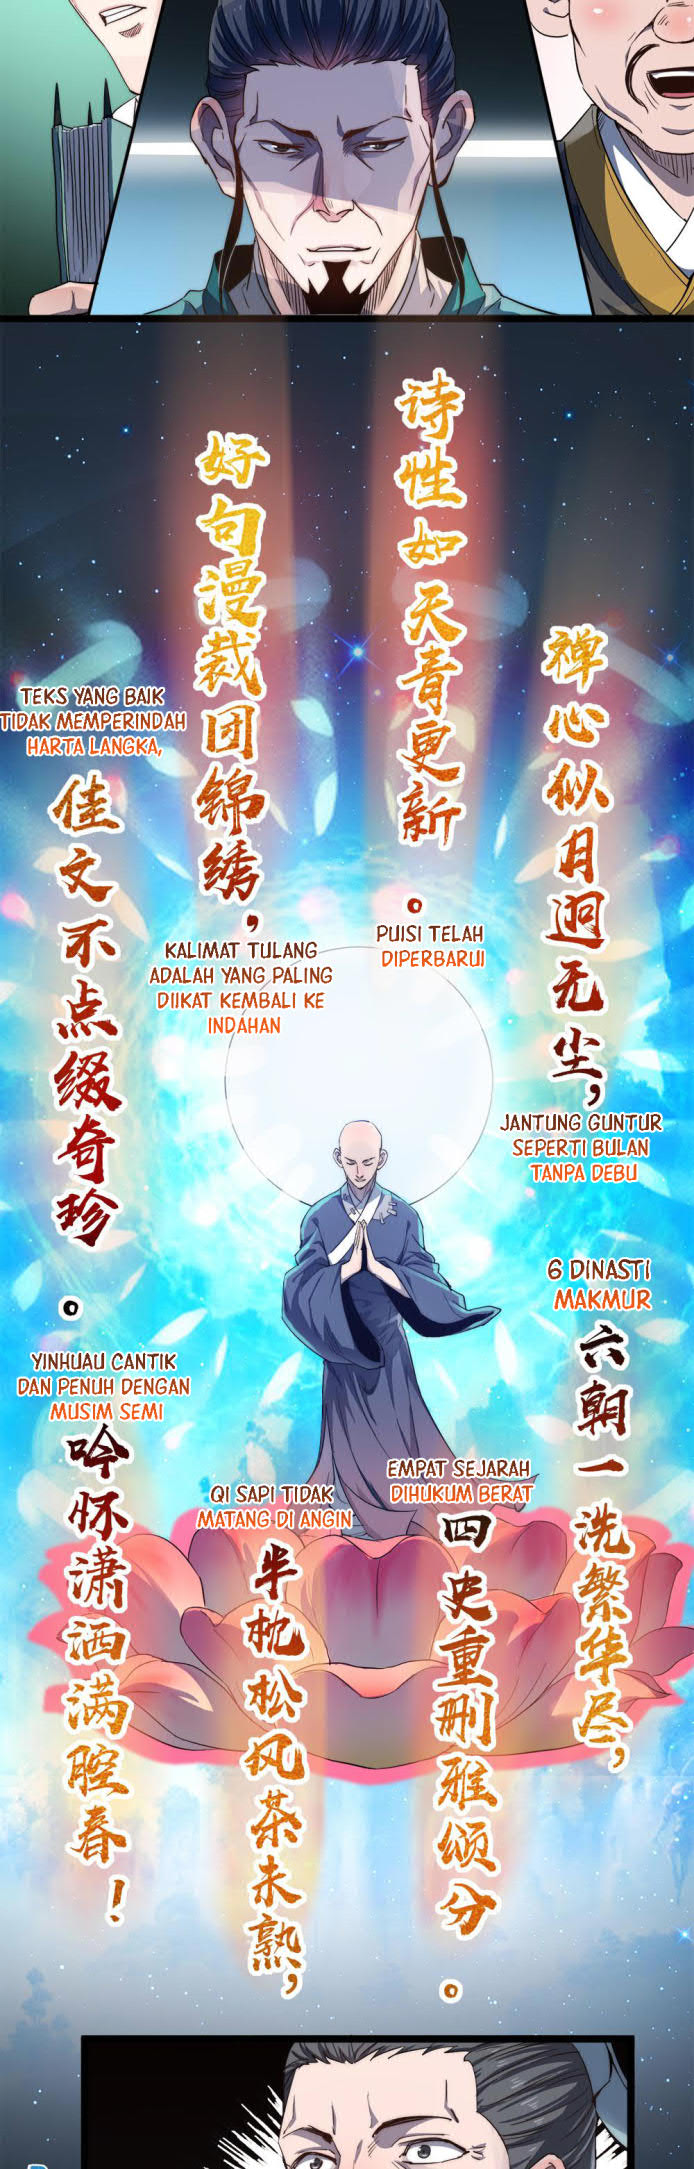 Building the Strongest Shaolin Temple in Another World Chapter 11 FIX